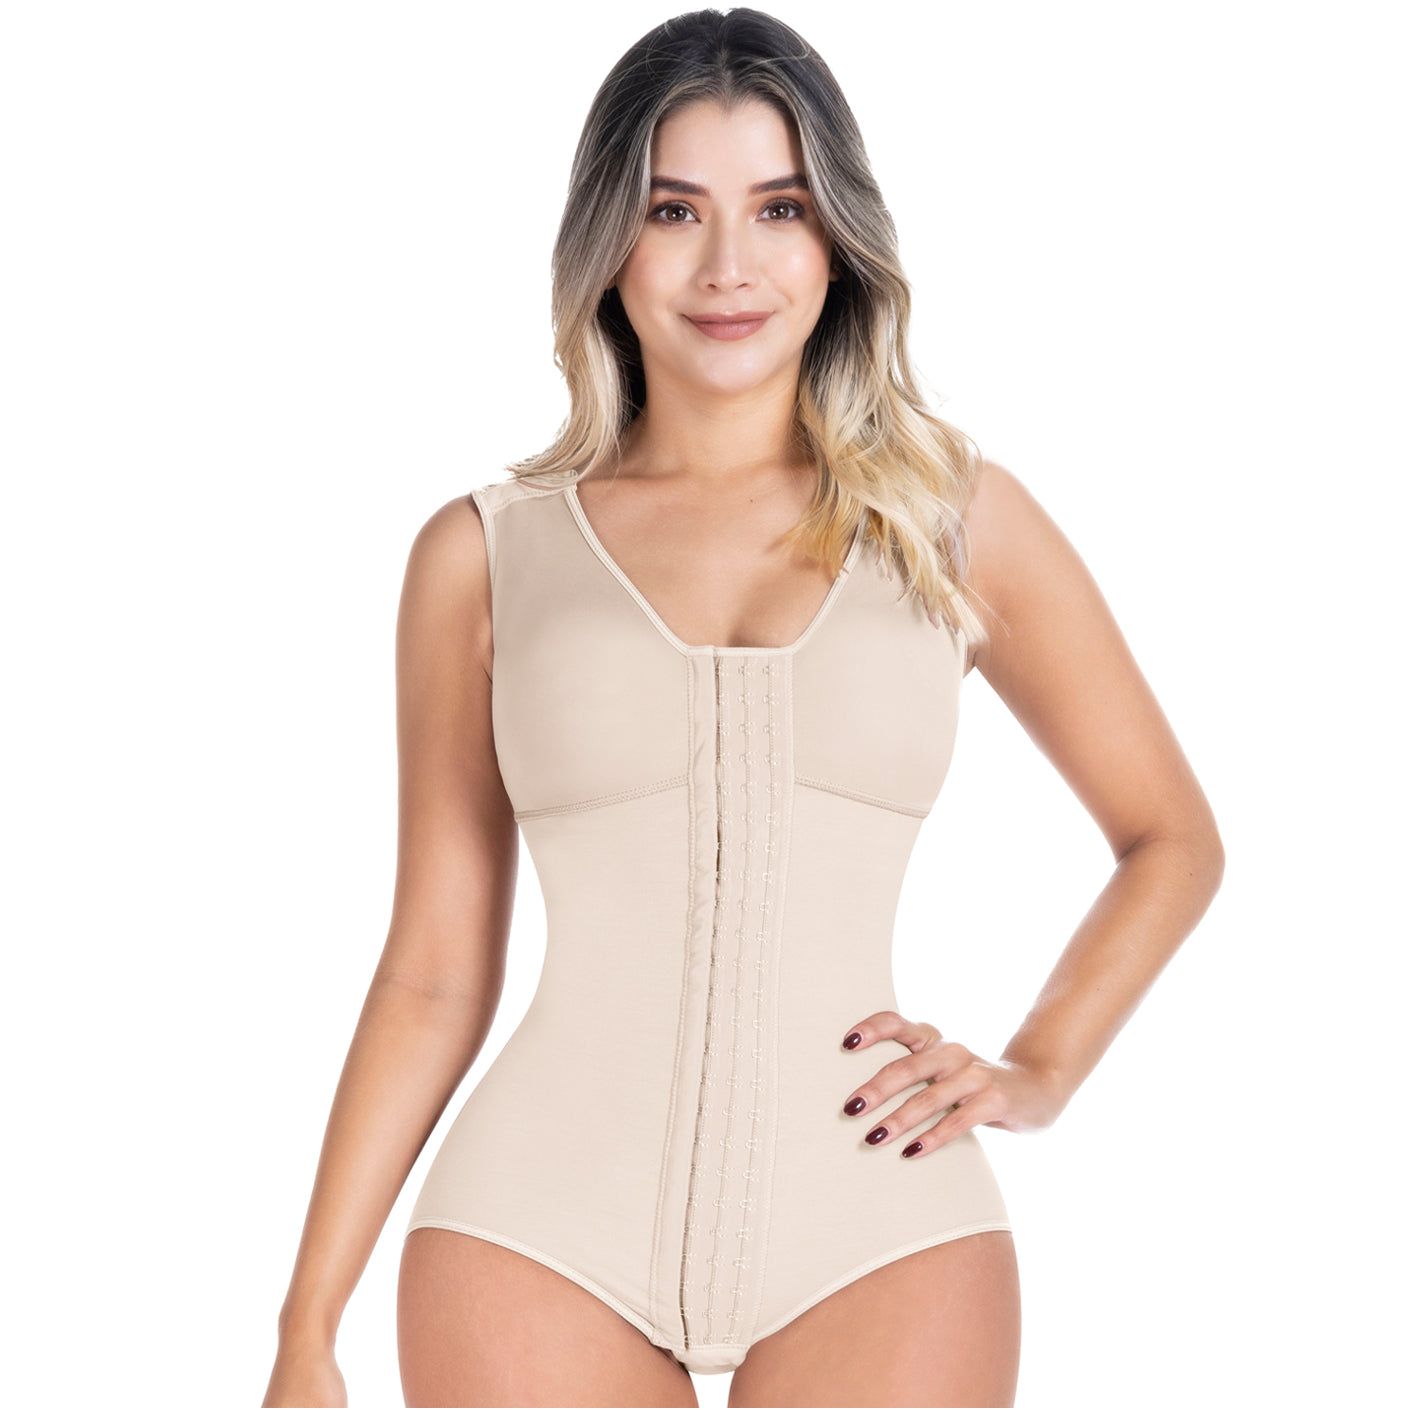 Postpartum C-section Faja Butt lifter Built-in bra & High compression  Sonryse 056BF - XS/30 / Beige